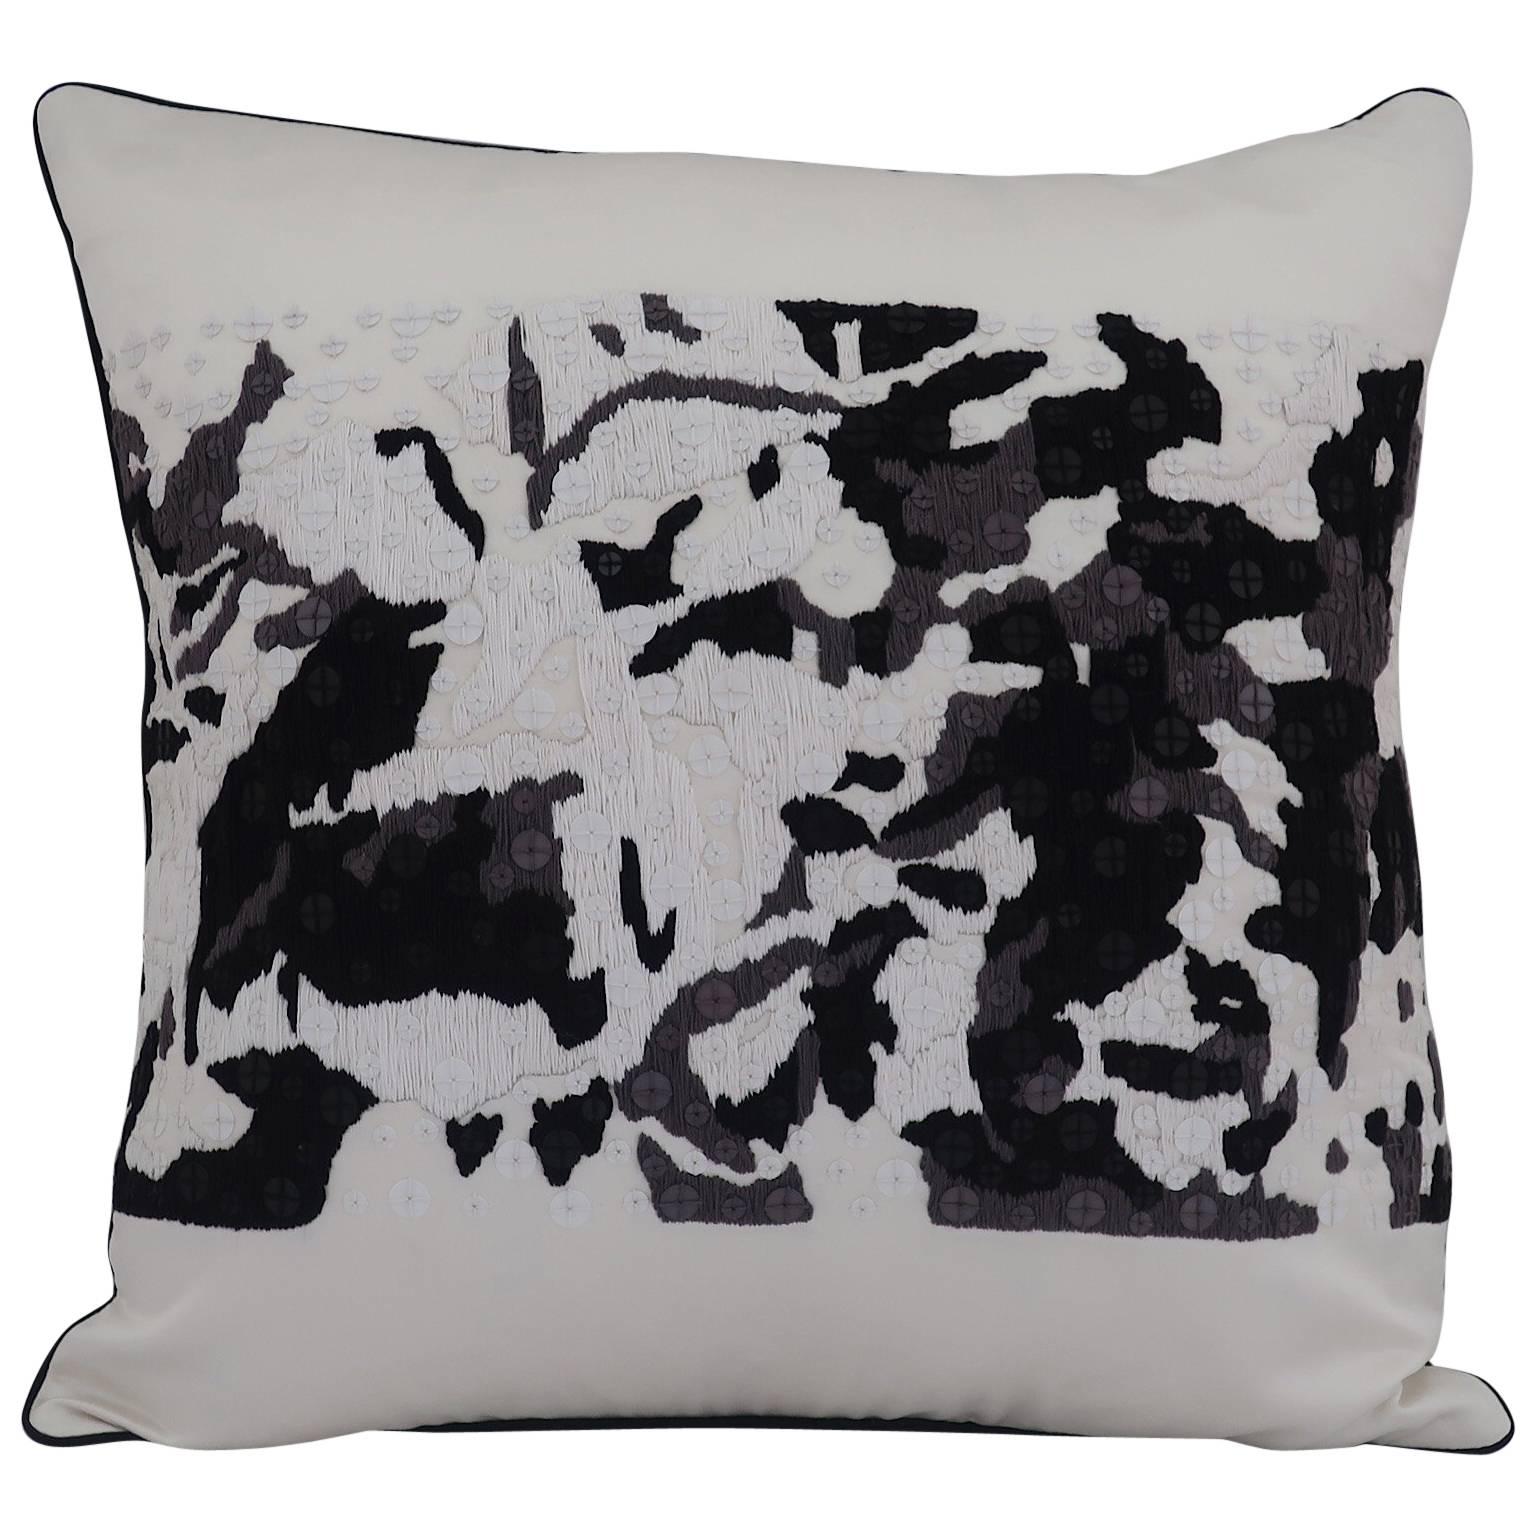 Handcrafted Embroidered Pillow Black White and Grey Abstract Floral For Sale